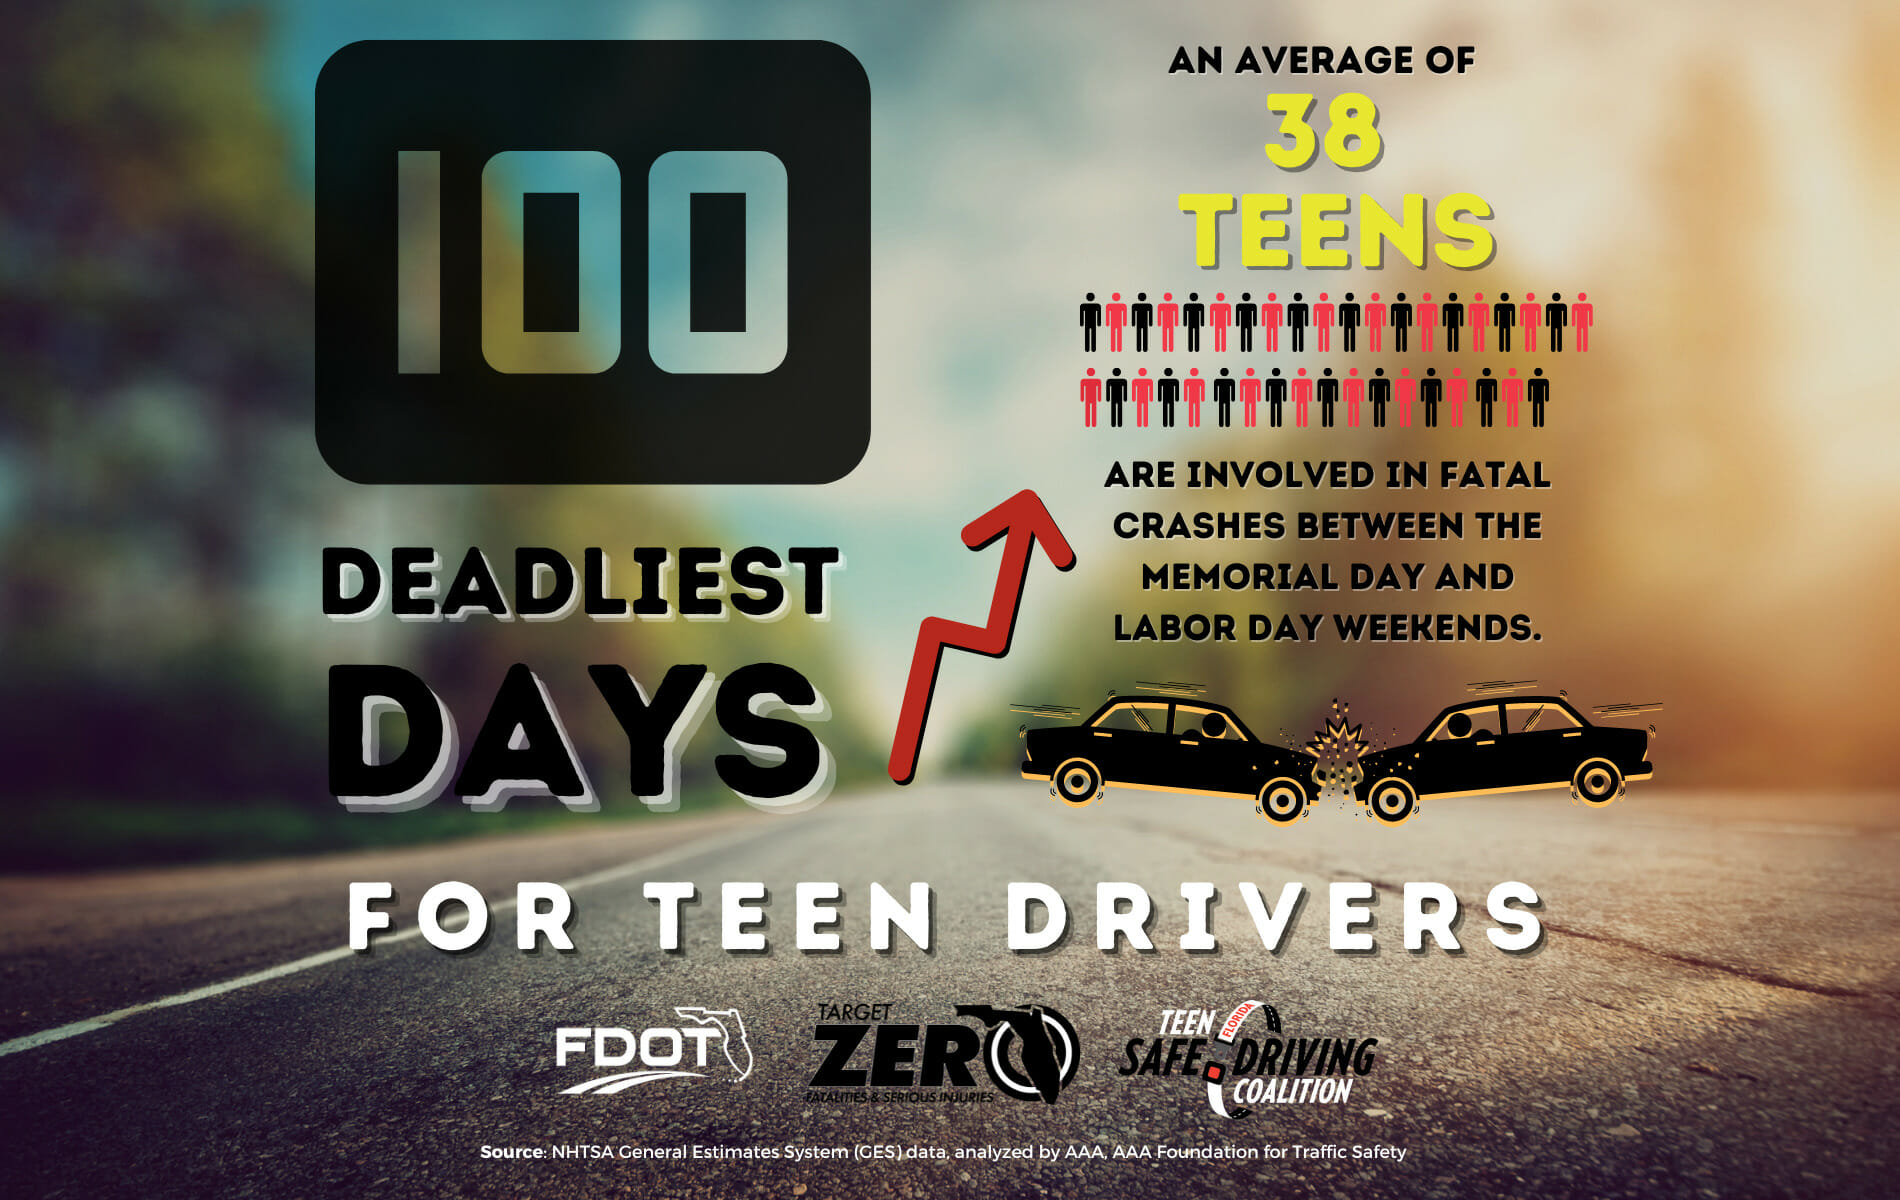 100 Deadliest Days for Teen Drivers Intro